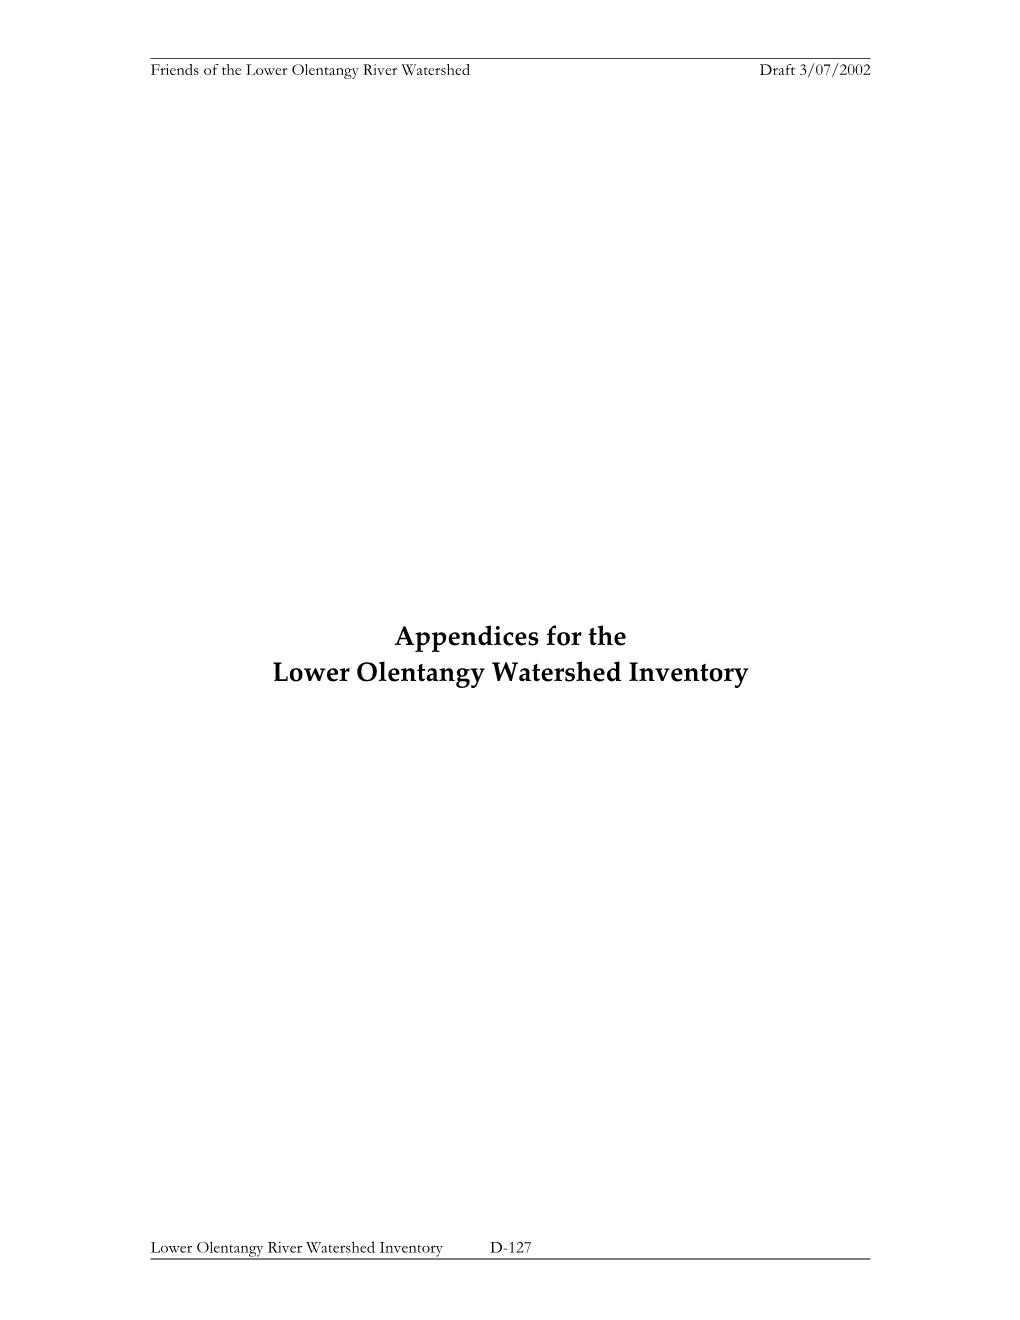 Appendices for the Lower Olentangy Watershed Inventory